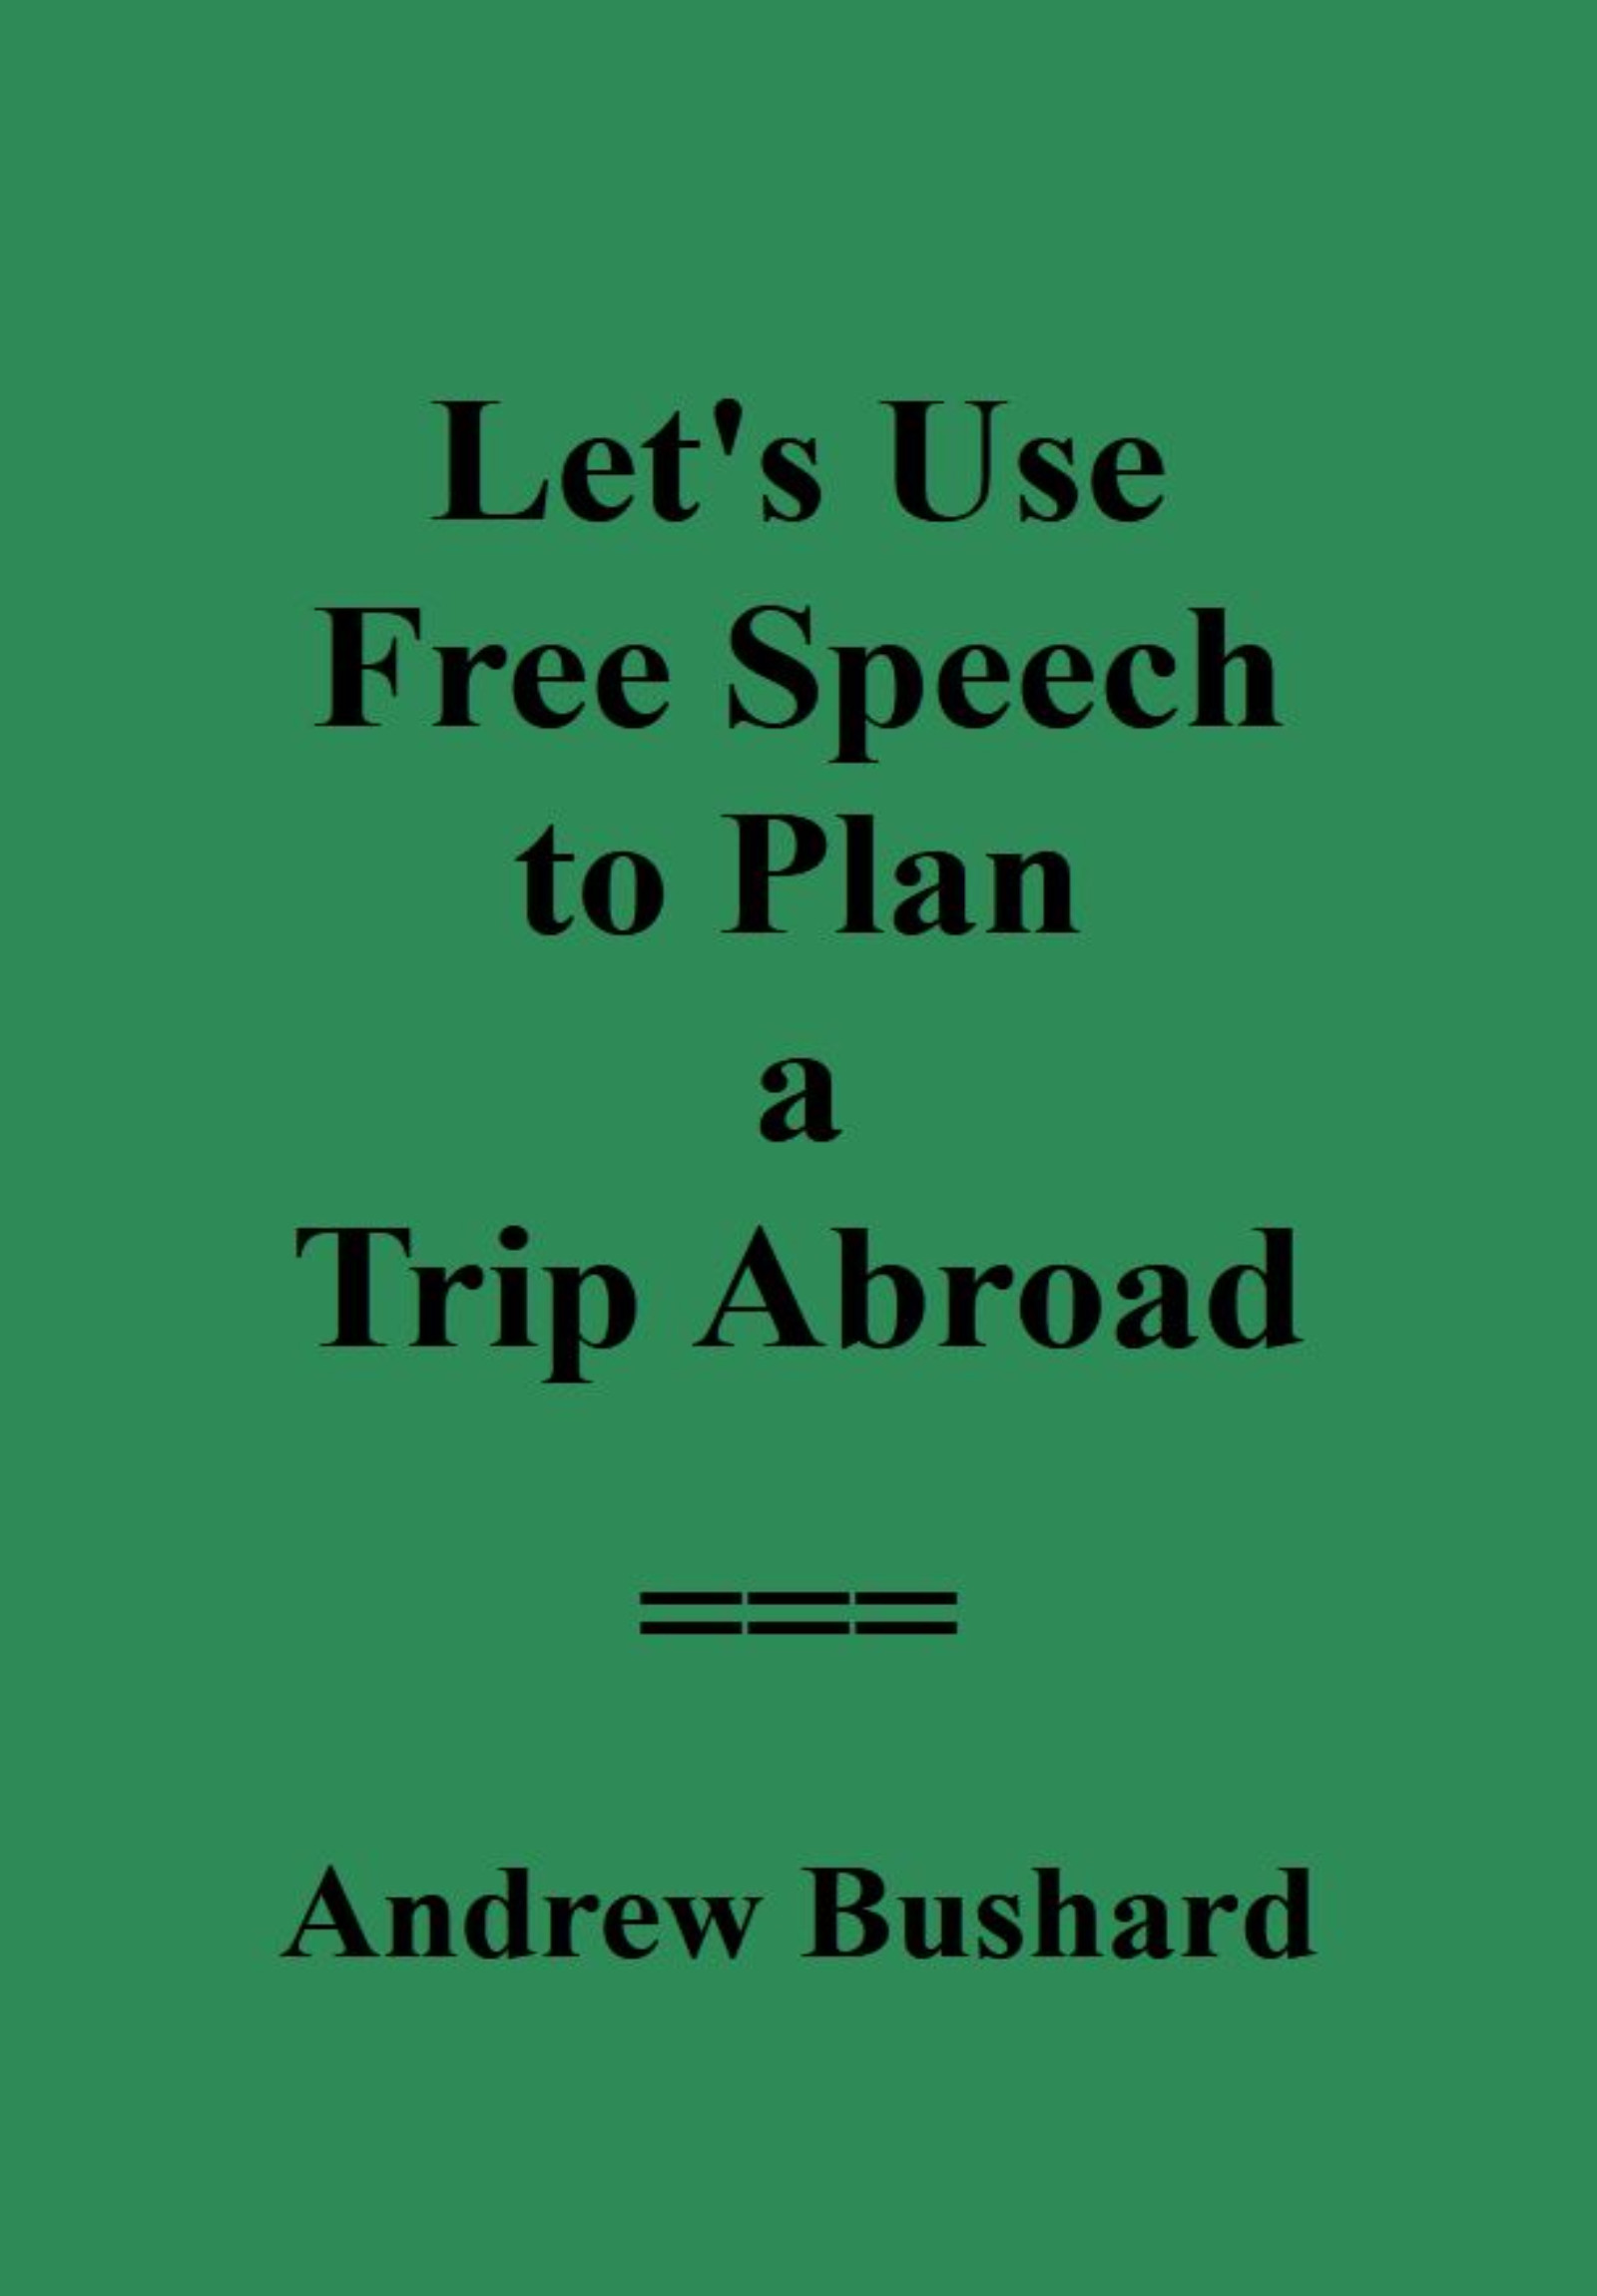 Let's Use Free Speech to Plan a Trip Abroad's featured image